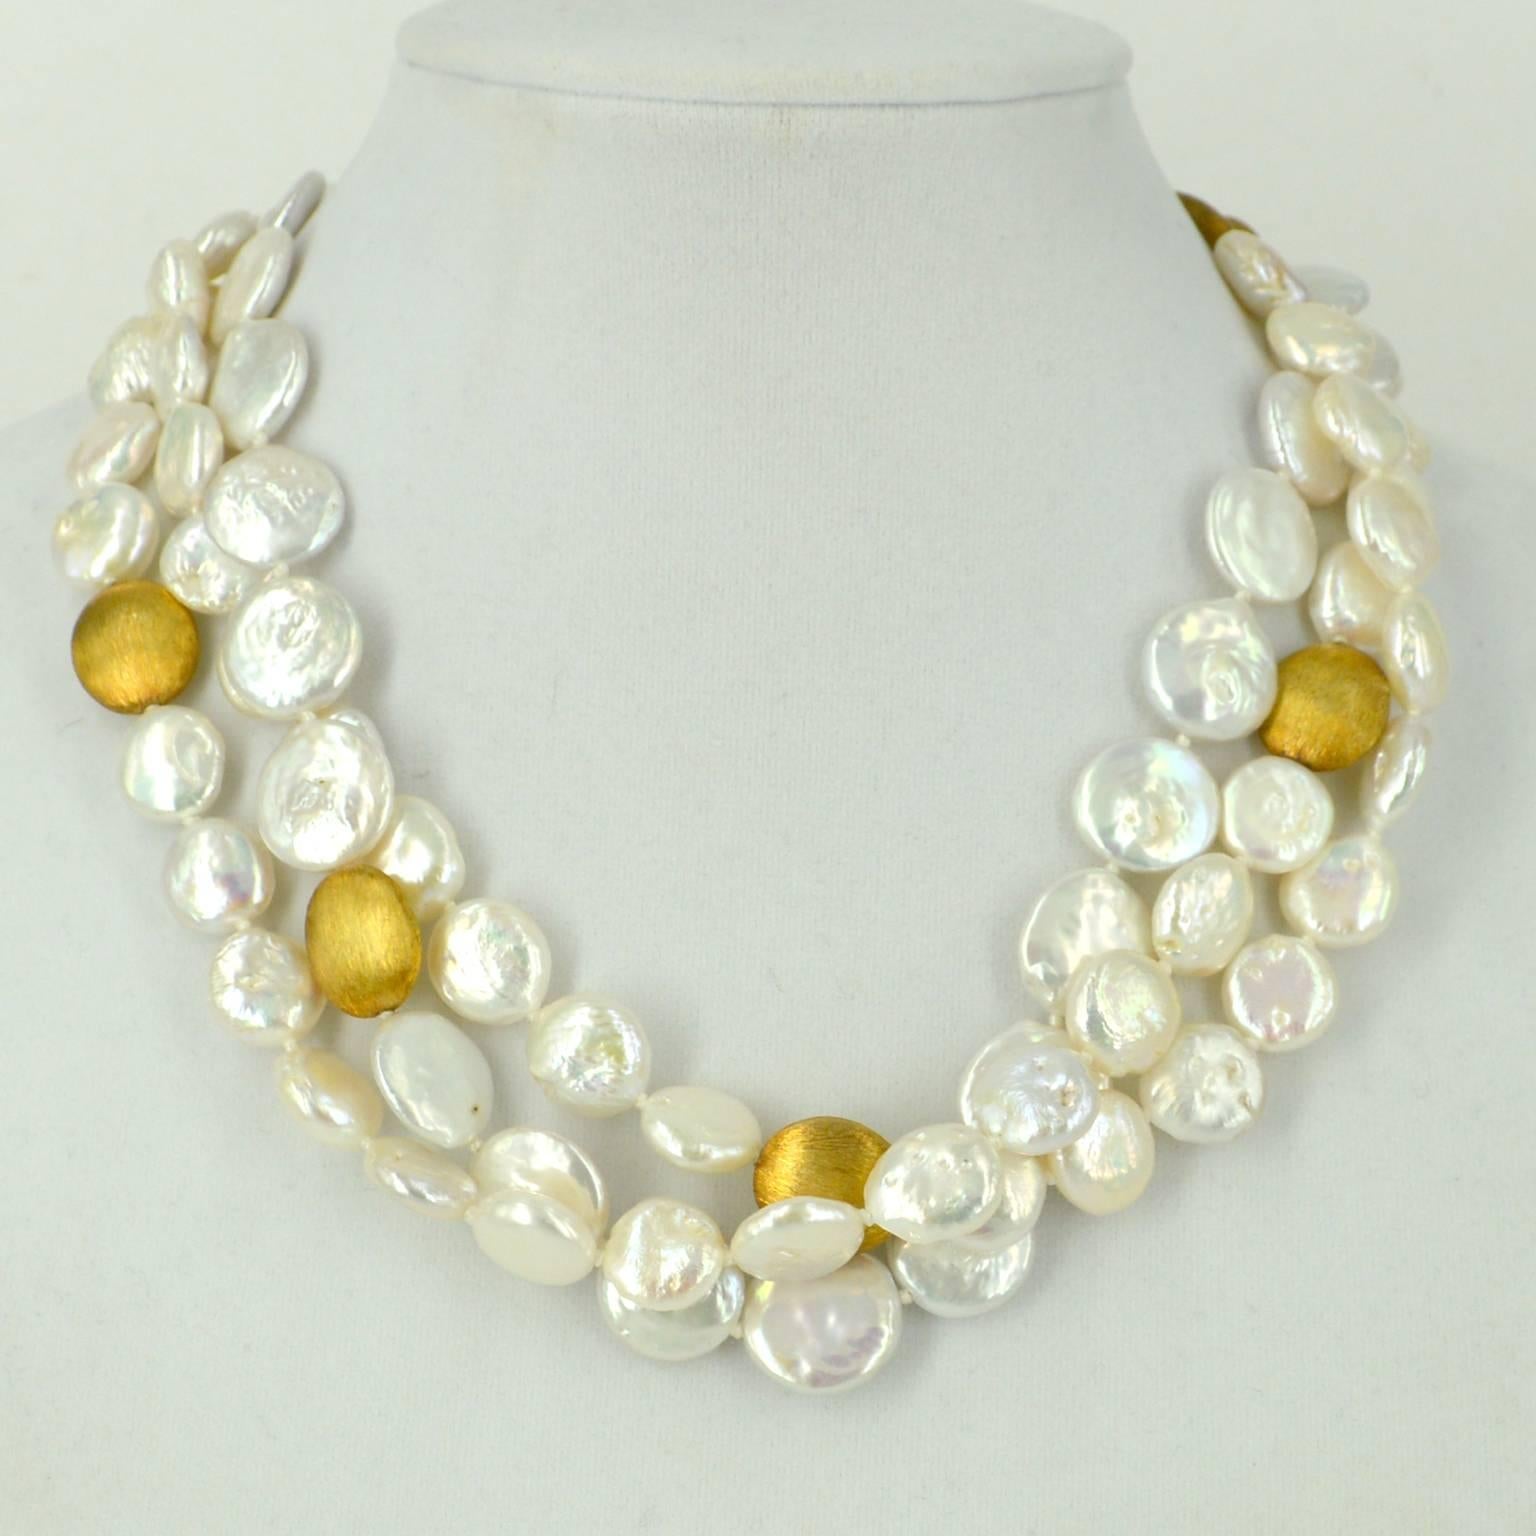 3 strands of Coin Pearls 2 strands are 12mm coin pearls and thrird strand are 15mm. knotted on white thread and spaced with 16x14mm Gold plate Sterling Silver brushed beads and a Gold plate Sterling Silver Magnetic clasp.
finished necklace measures